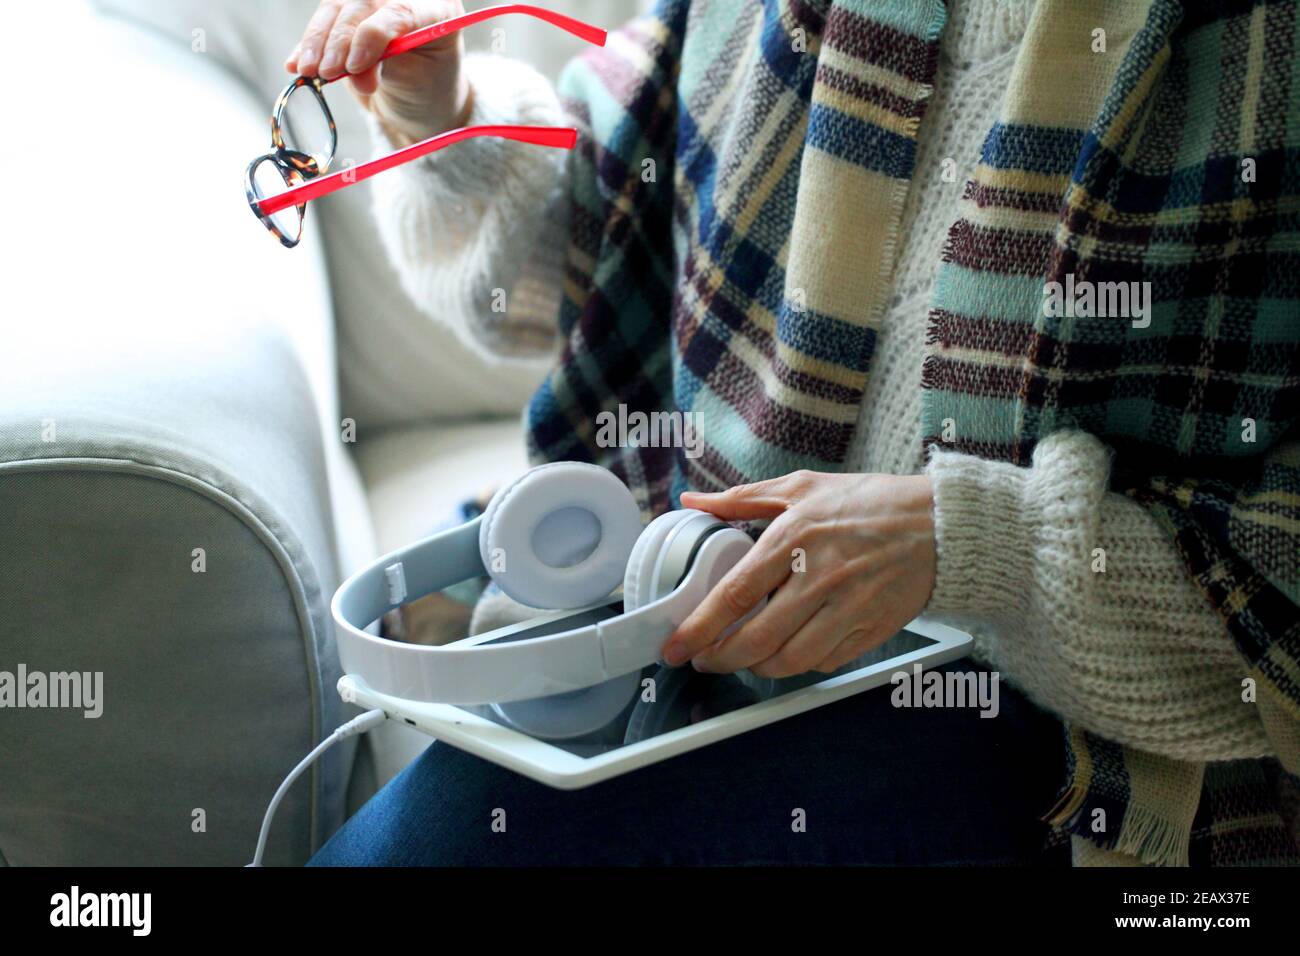 Closeup shot of a woman sitting on the couch holding glasses and headphones with a tablet on her lap Stock Photo